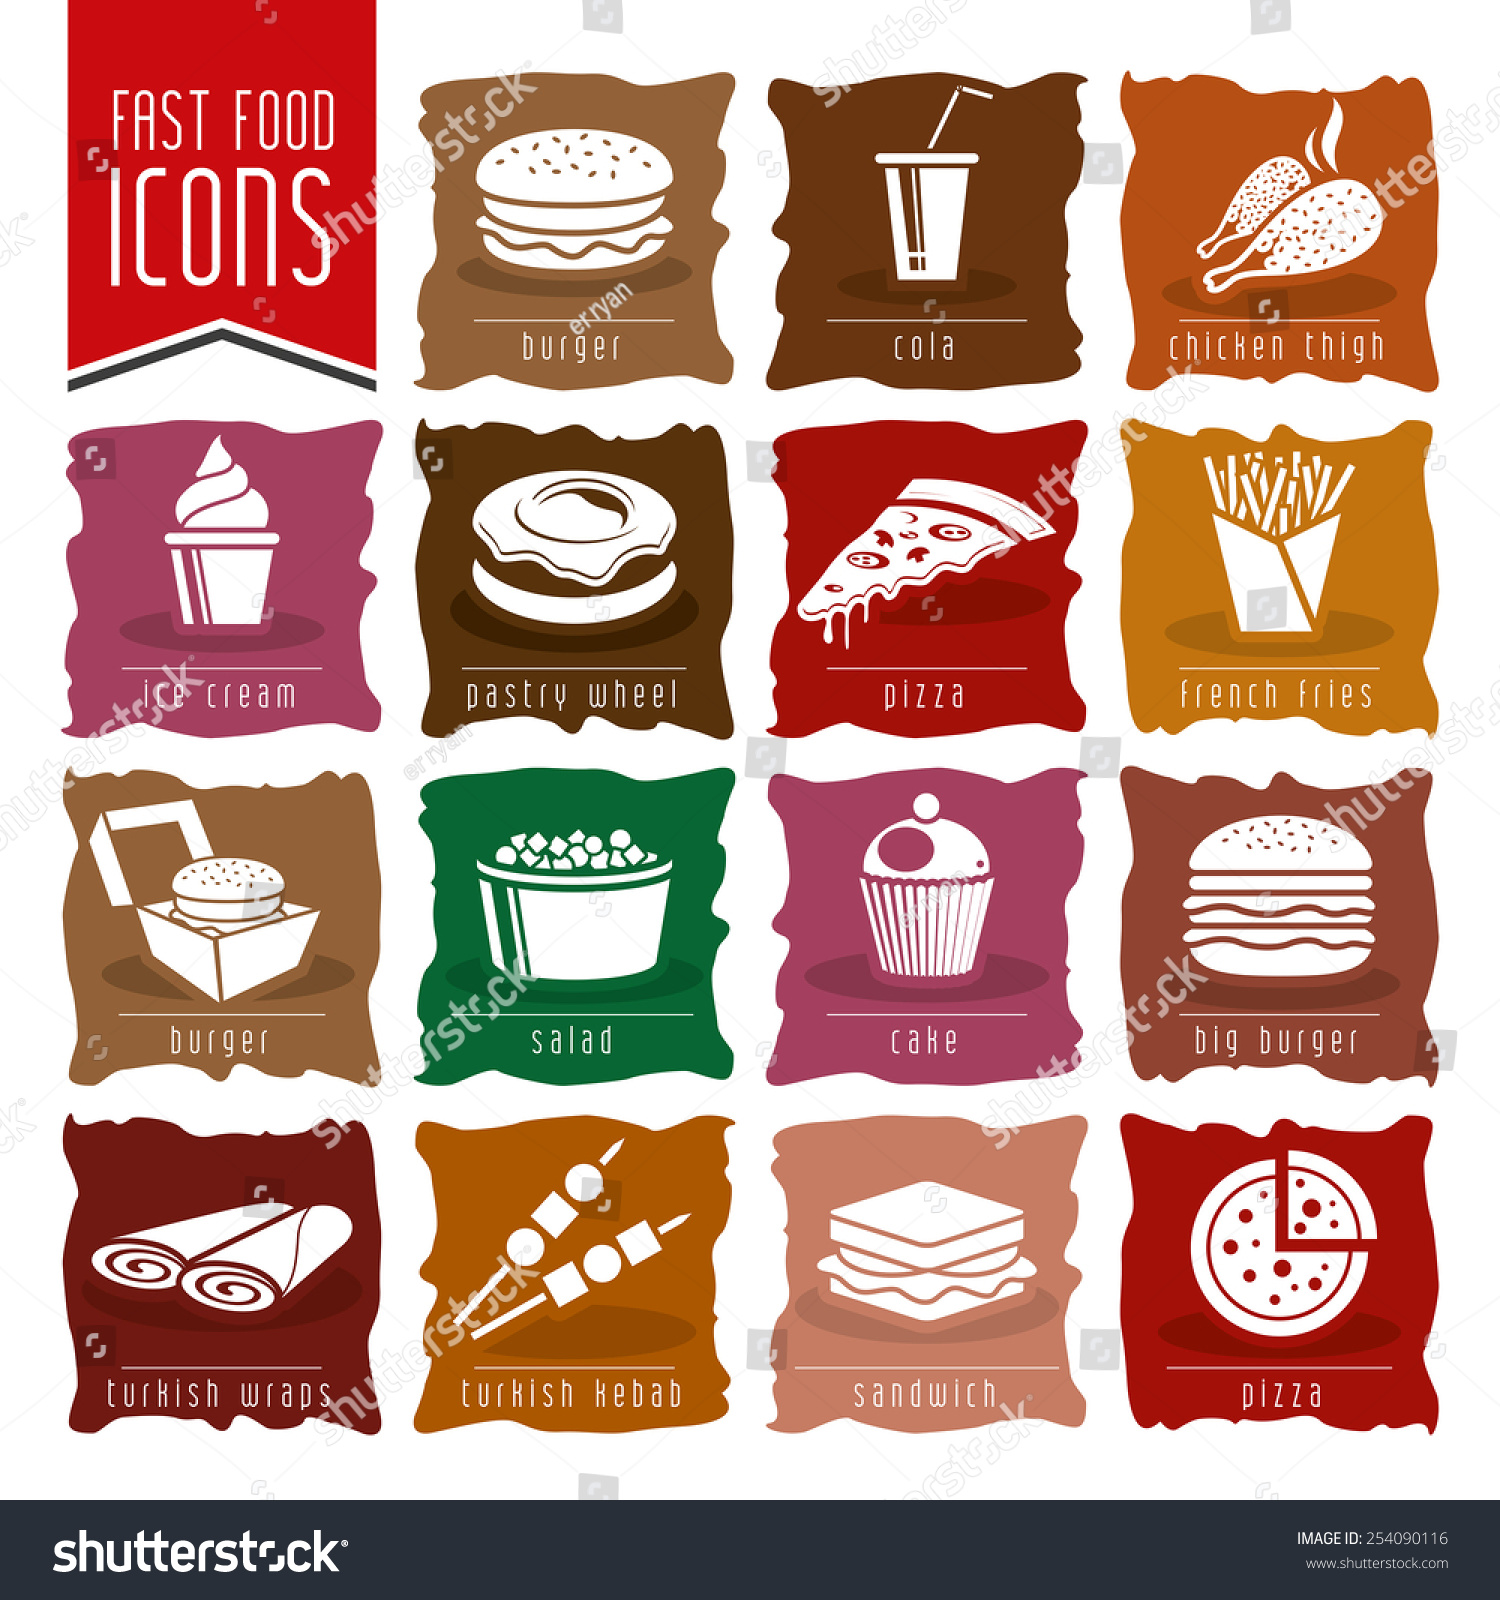 Fast Food Icons - 5 Stock Vector Illustration 254090116 : Shutterstock